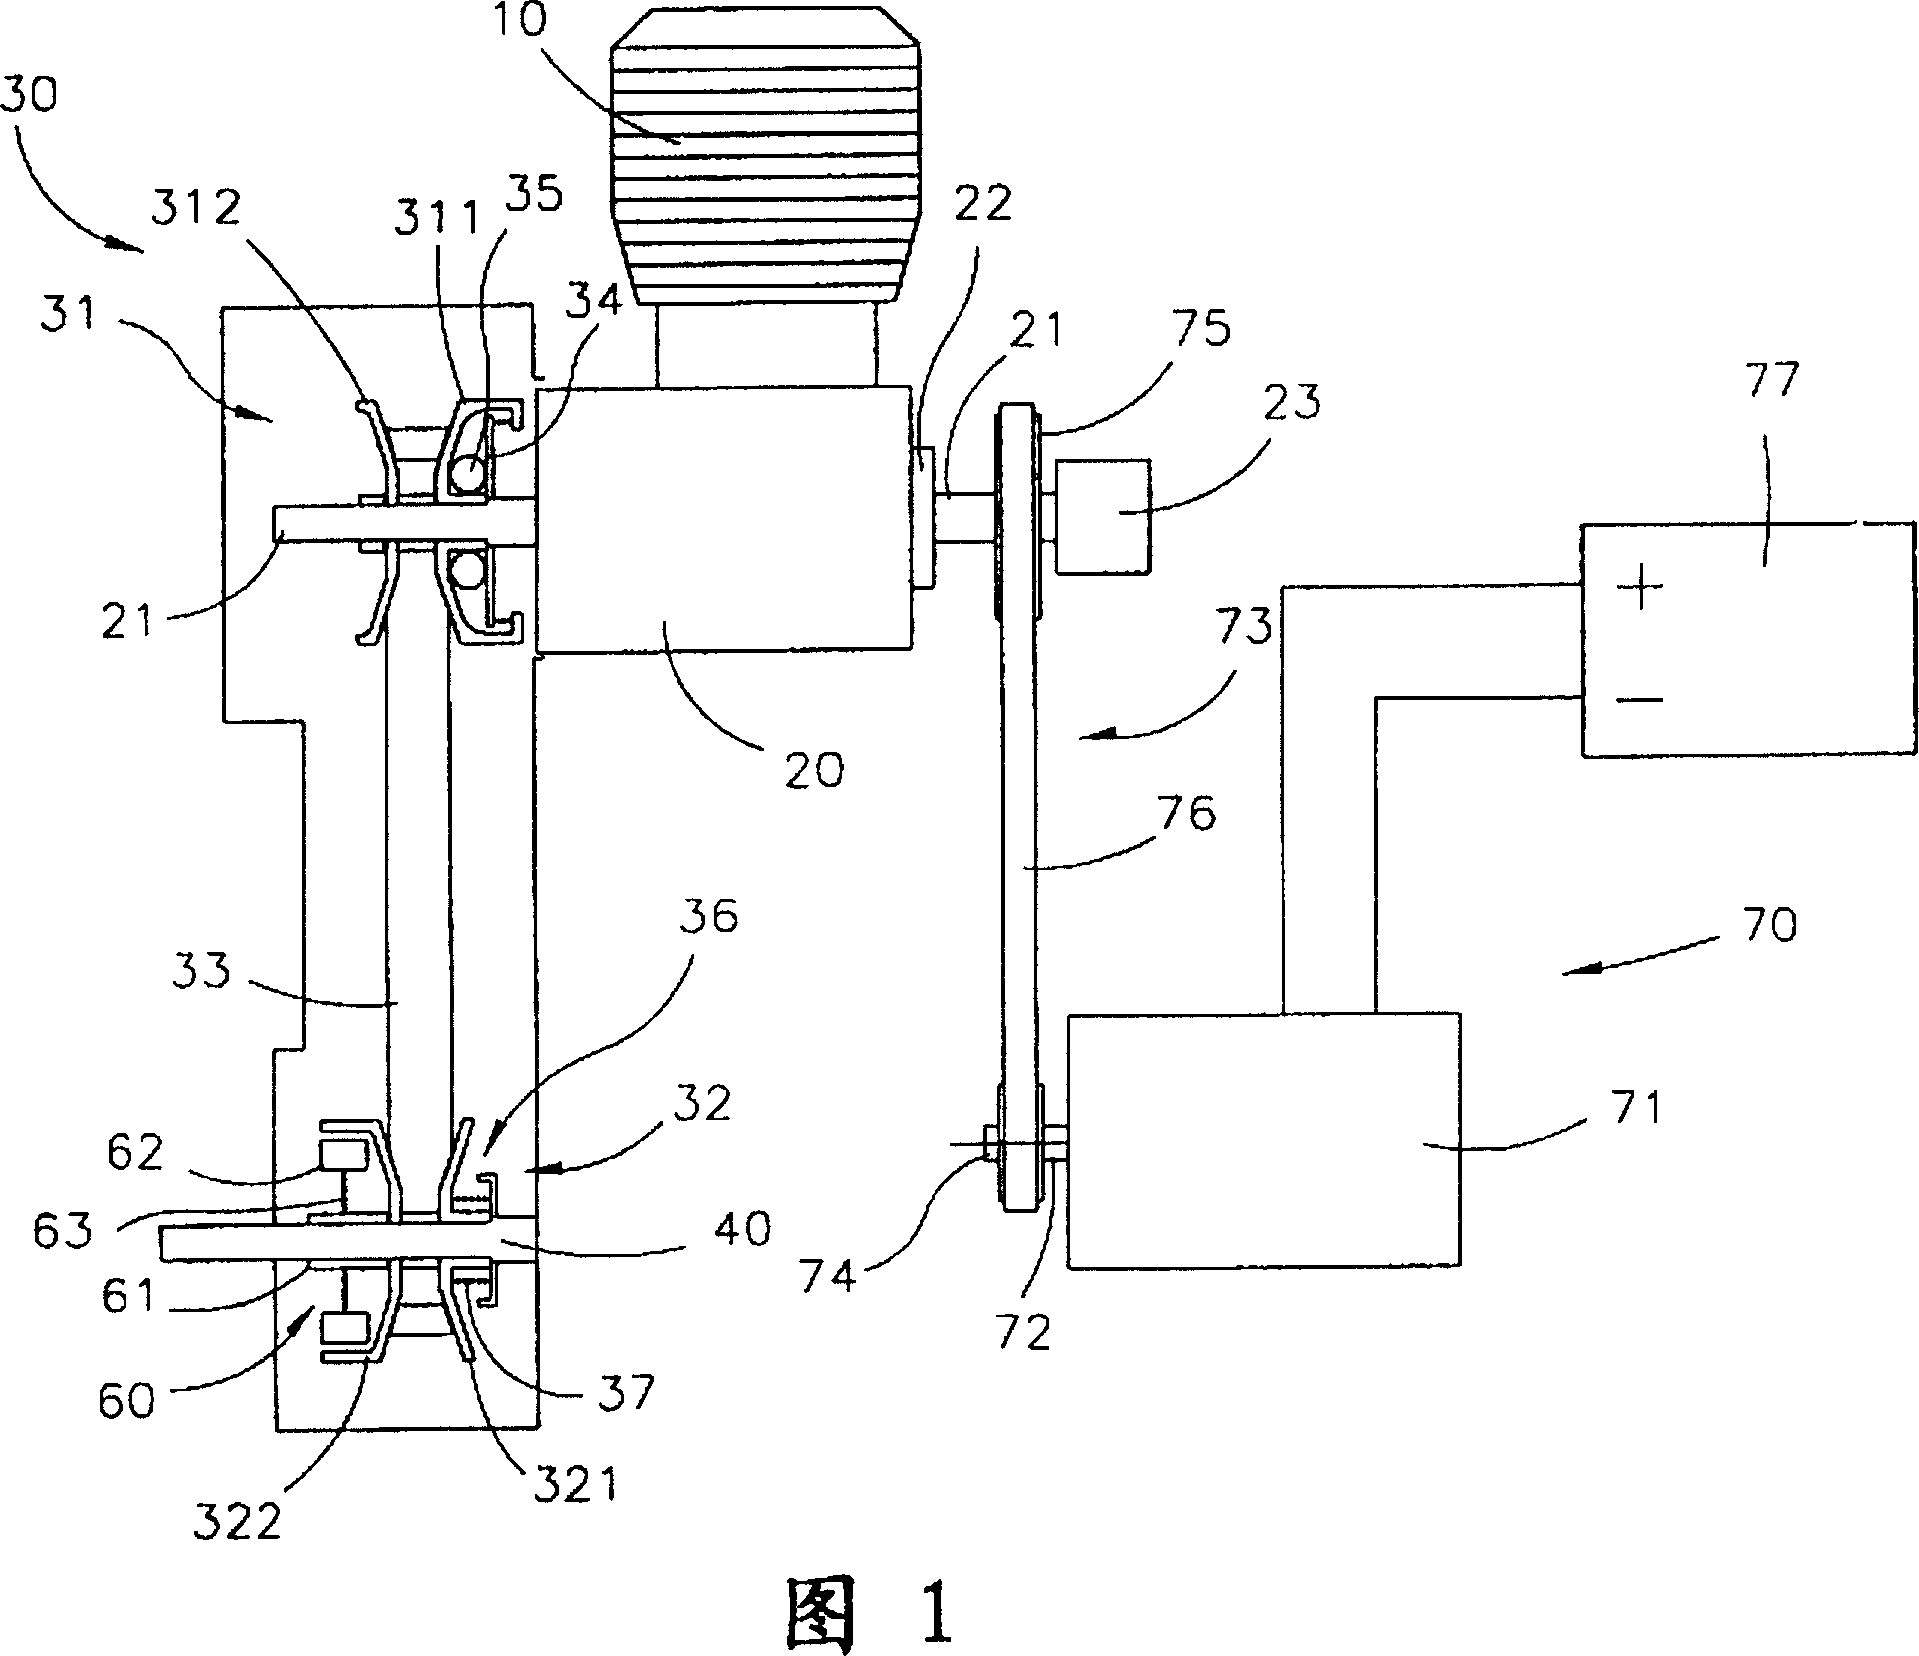 Composite power system of outer jointed auxiliary power